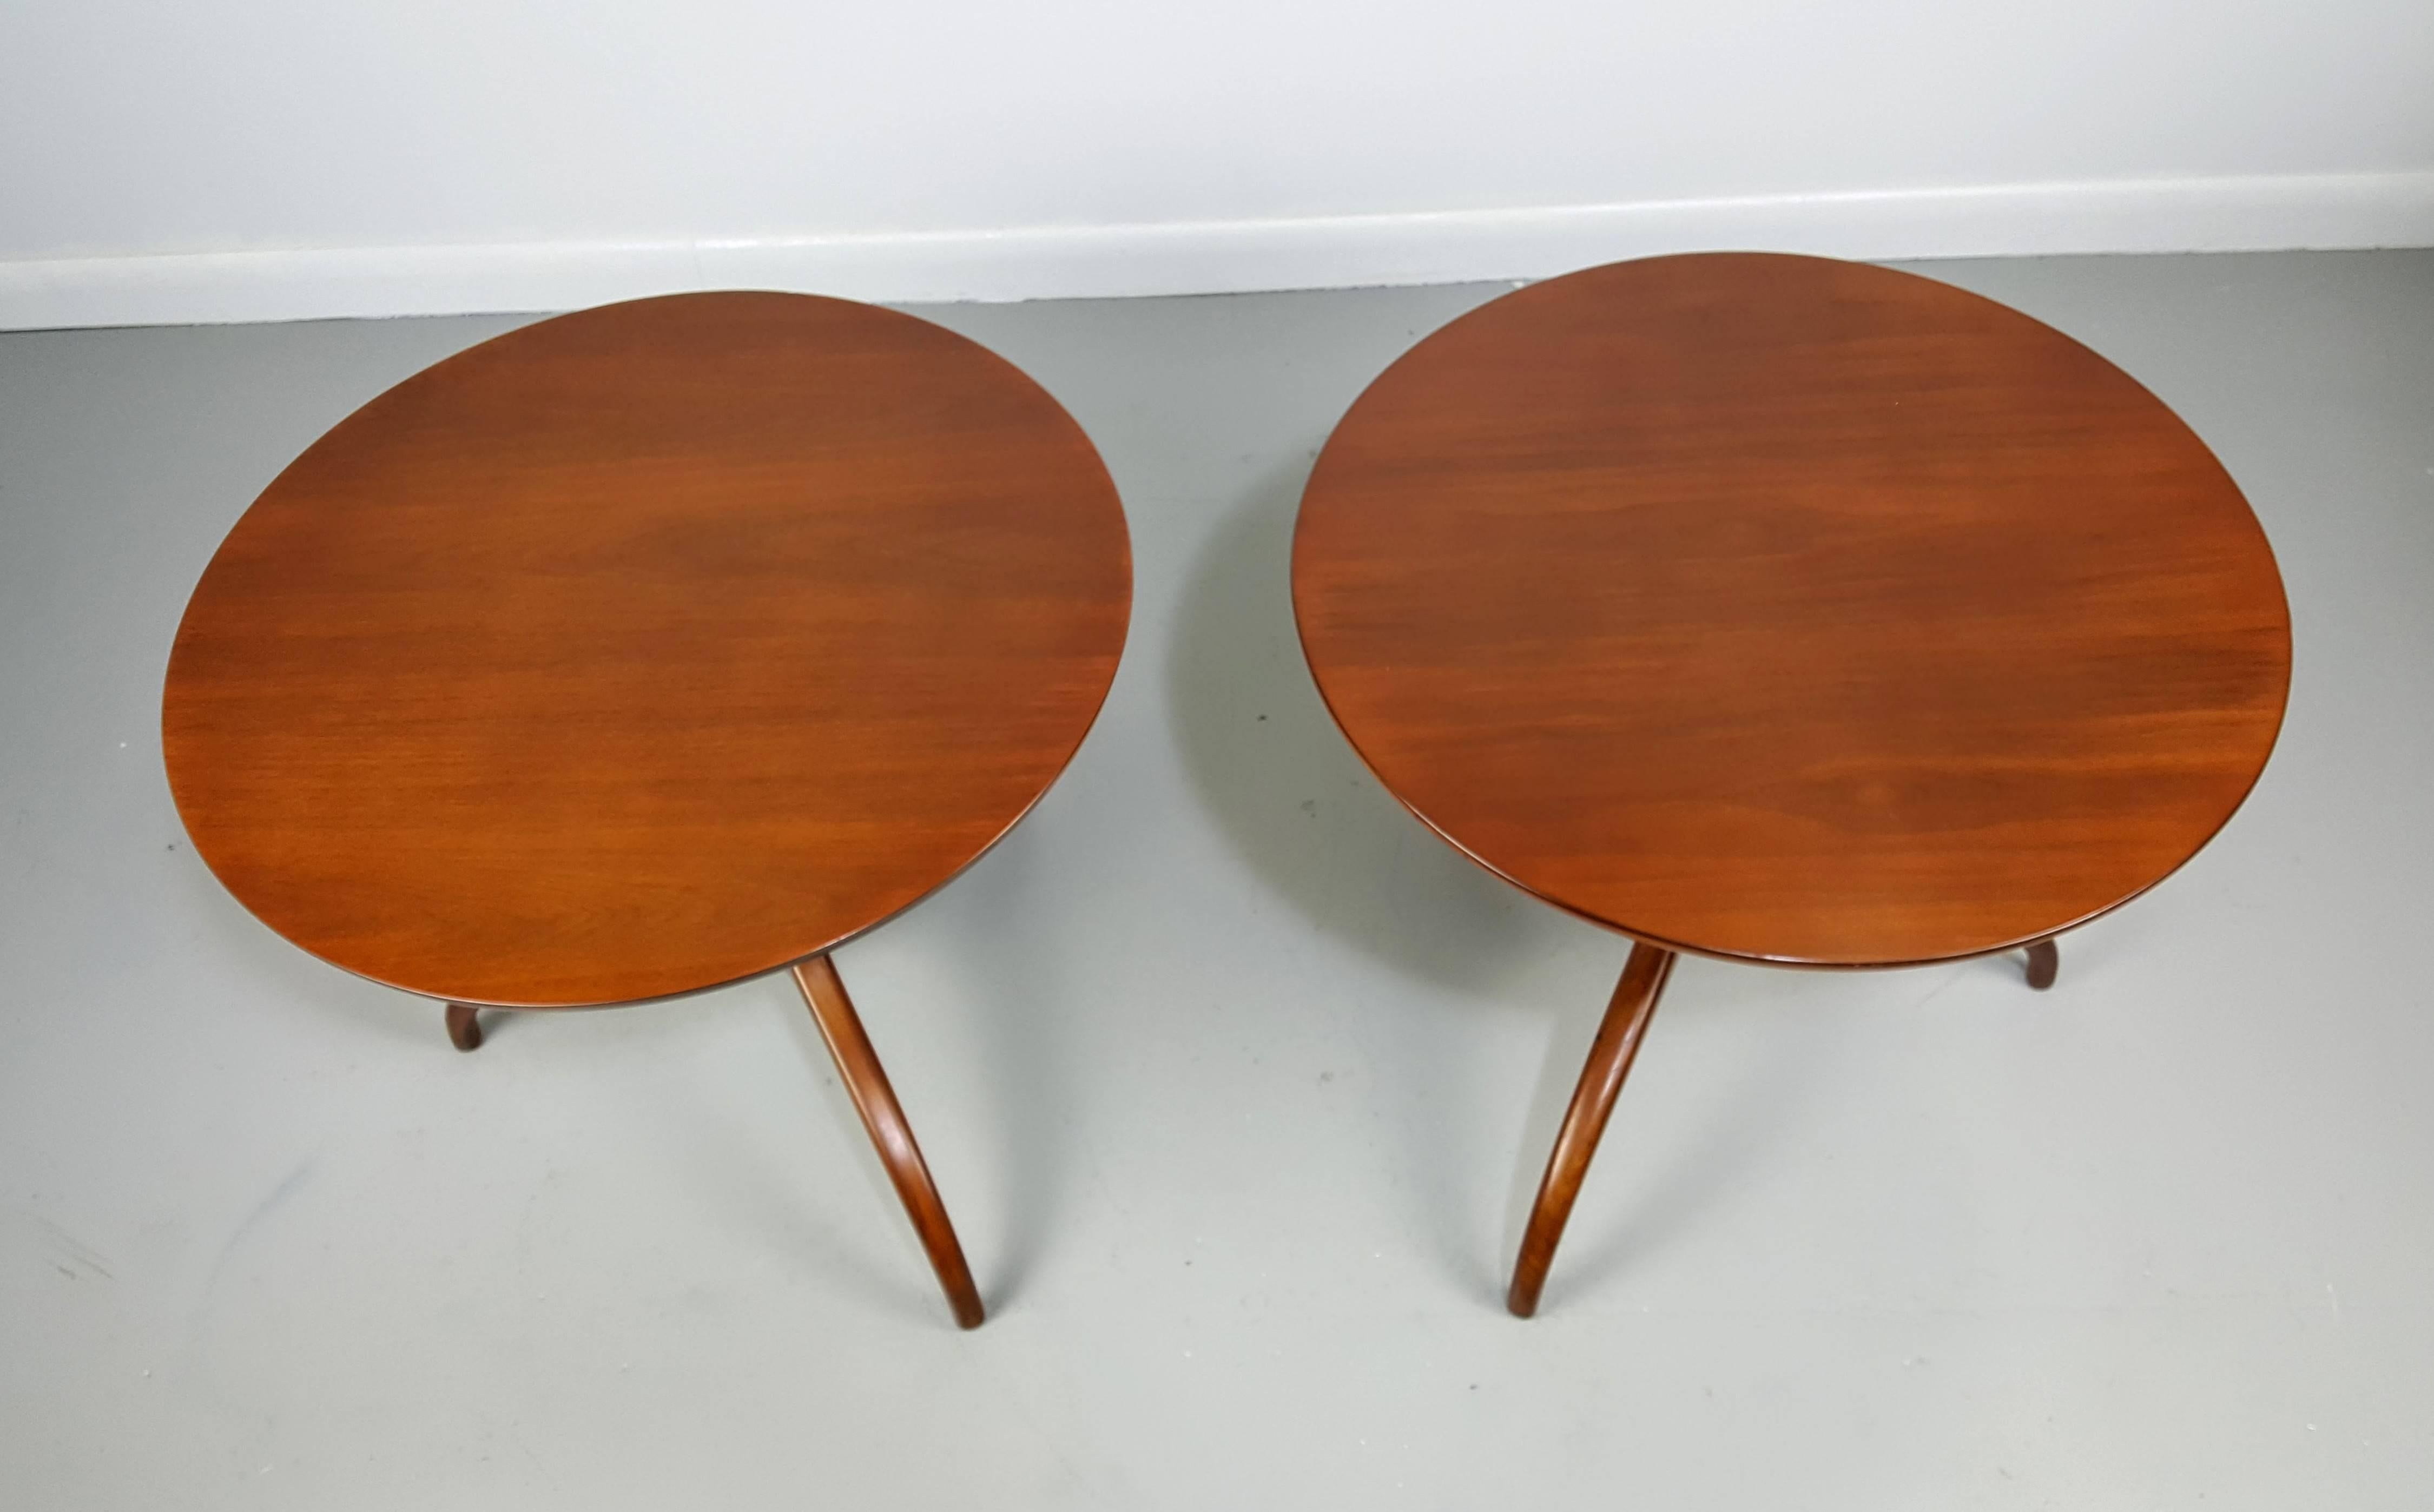 American Sculptural Pair of Walnut Side Tables with Wishbone Base by Heritage Henredon 